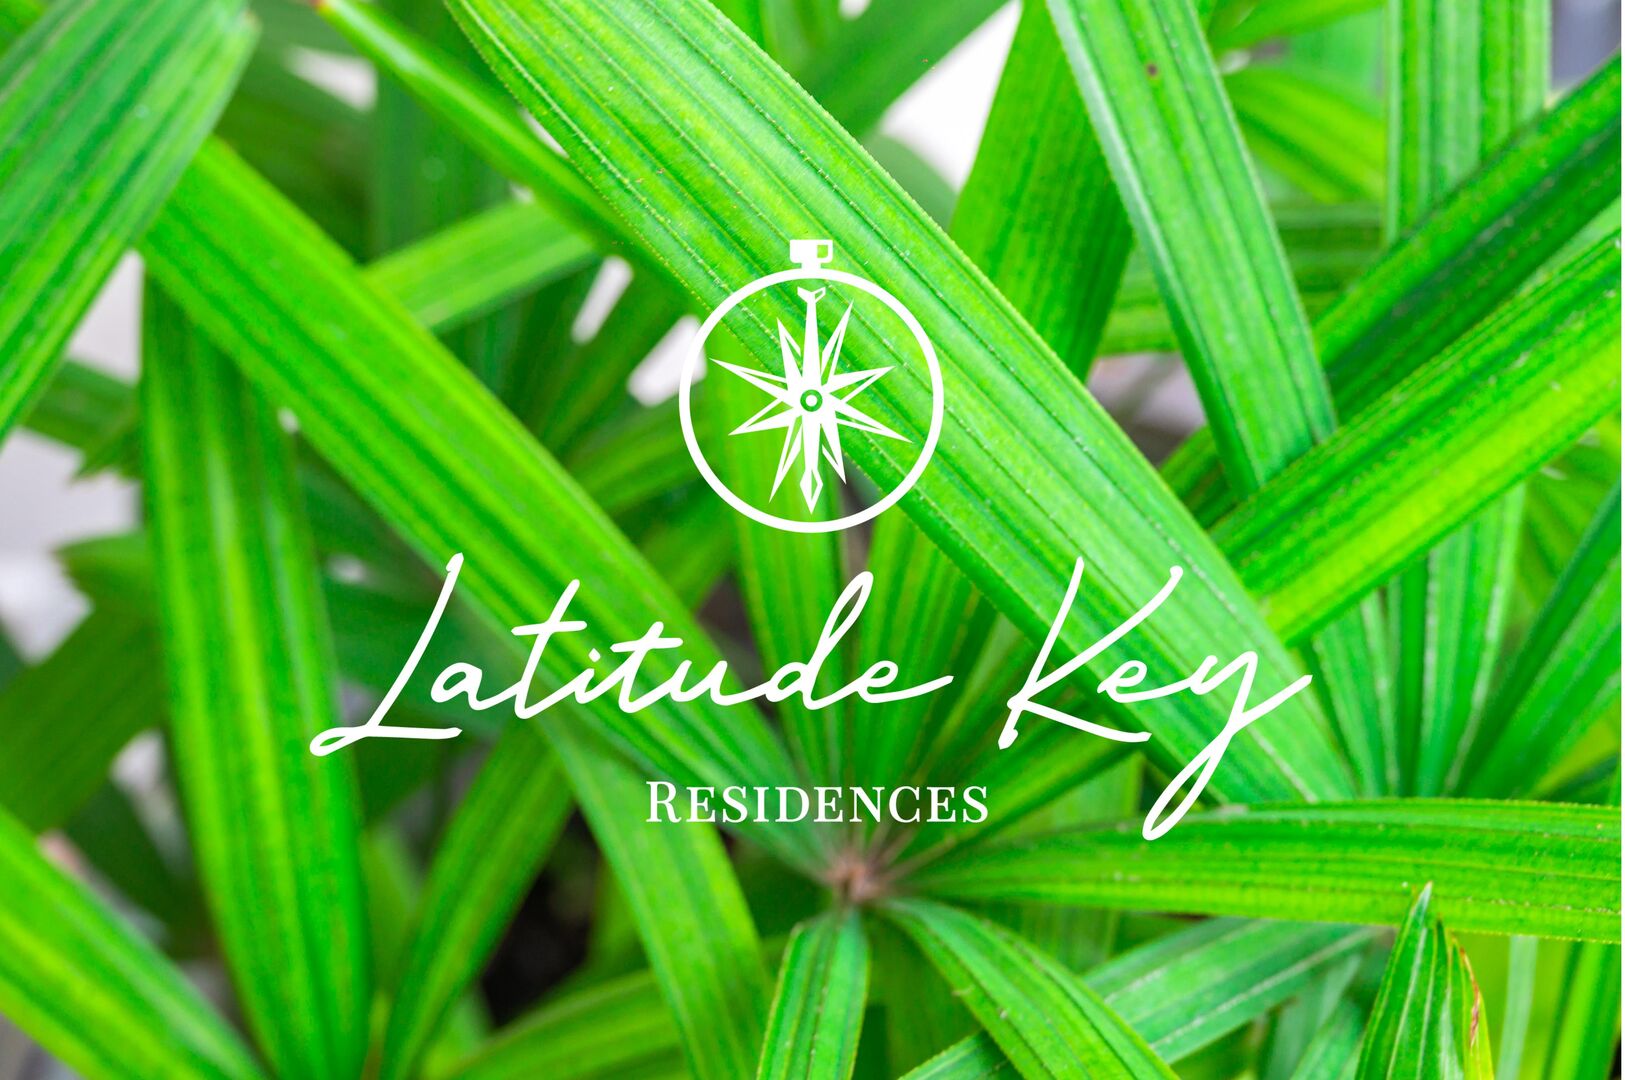 Gulfstream Key is part of the Residences Collection. Enjoy a stress free vacation with Latitude Key - Curated Vacation Properties